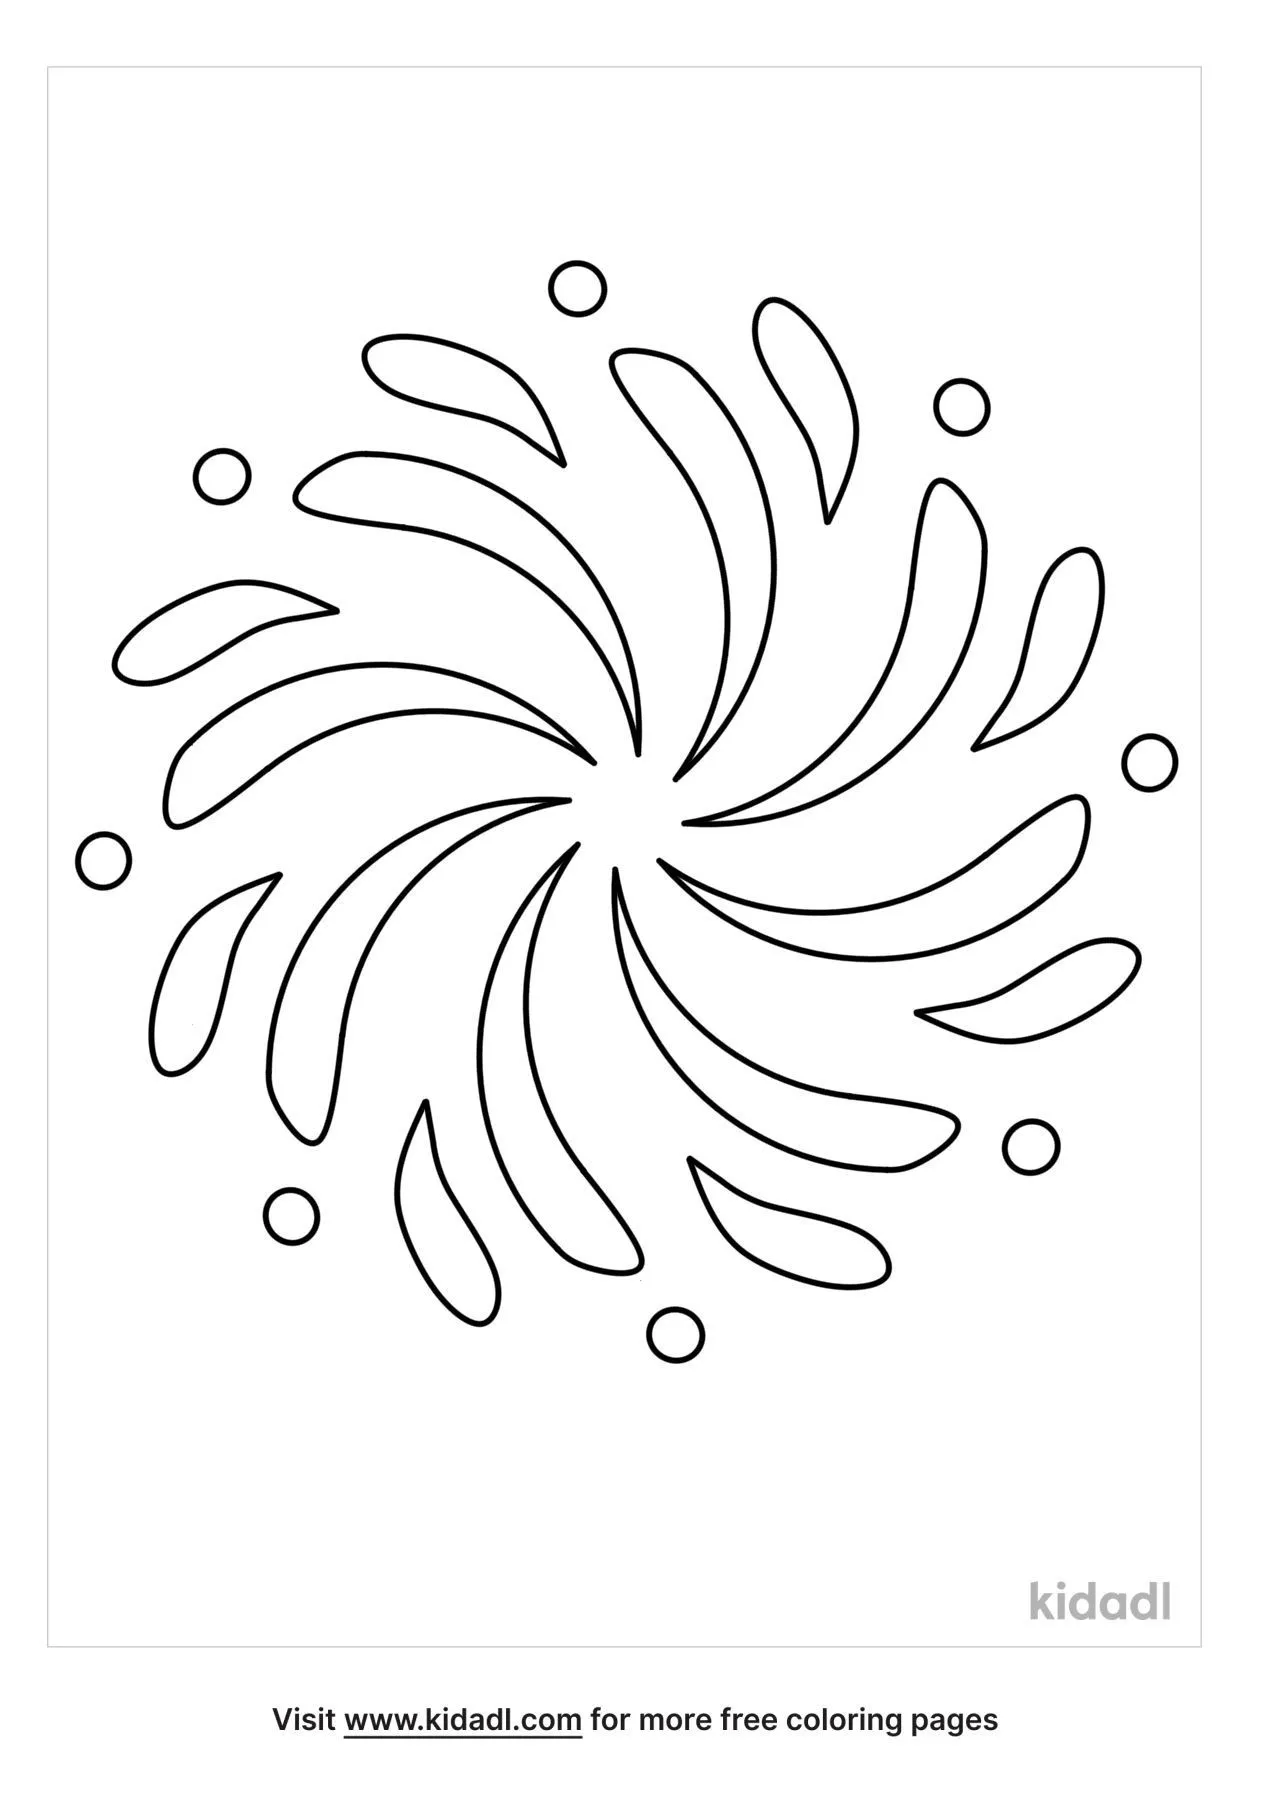 Swirly Coloring Page